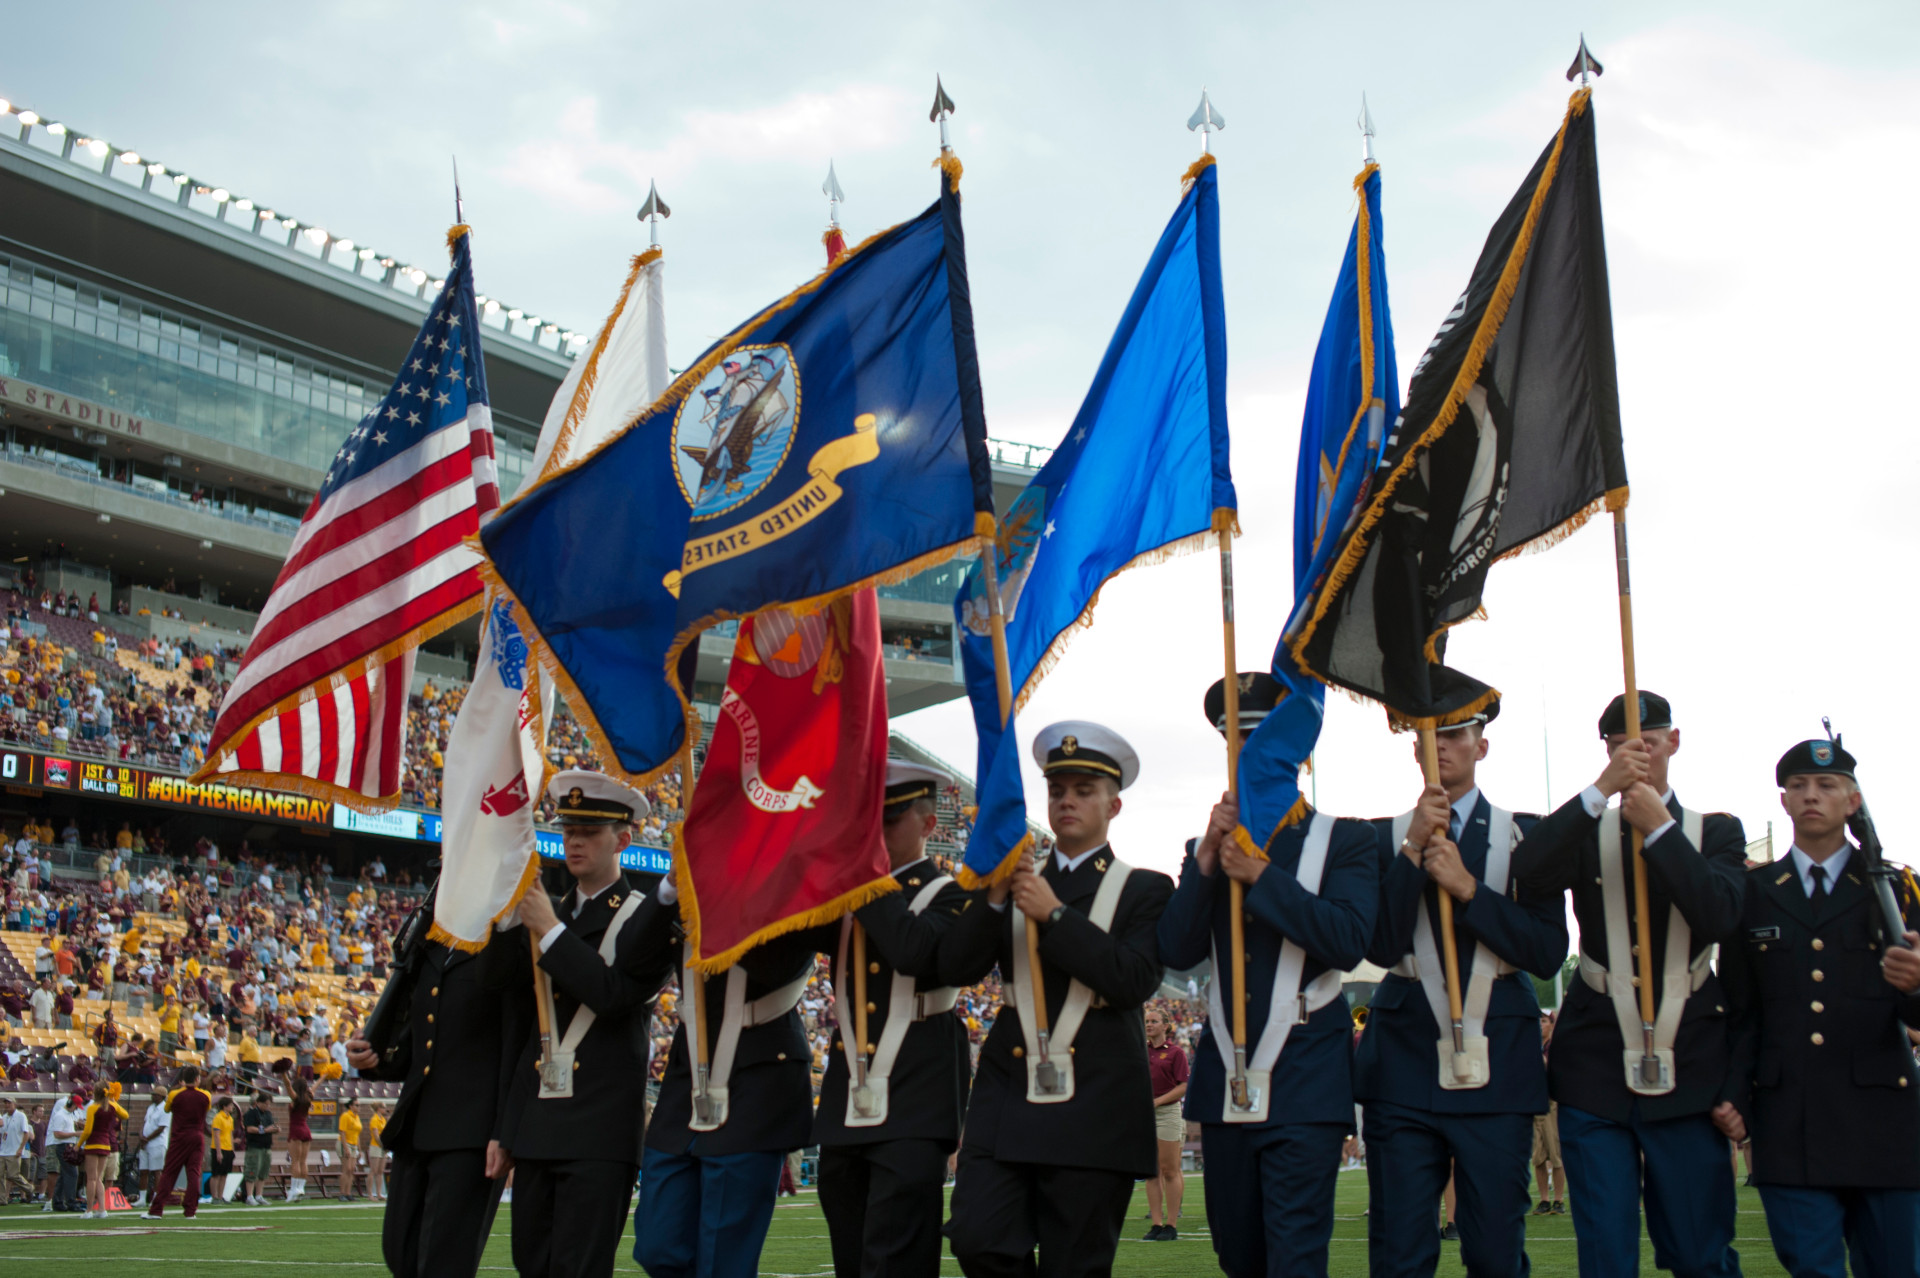 Members of the University of Minnesota ROTC carry the nation and state flags at a football game